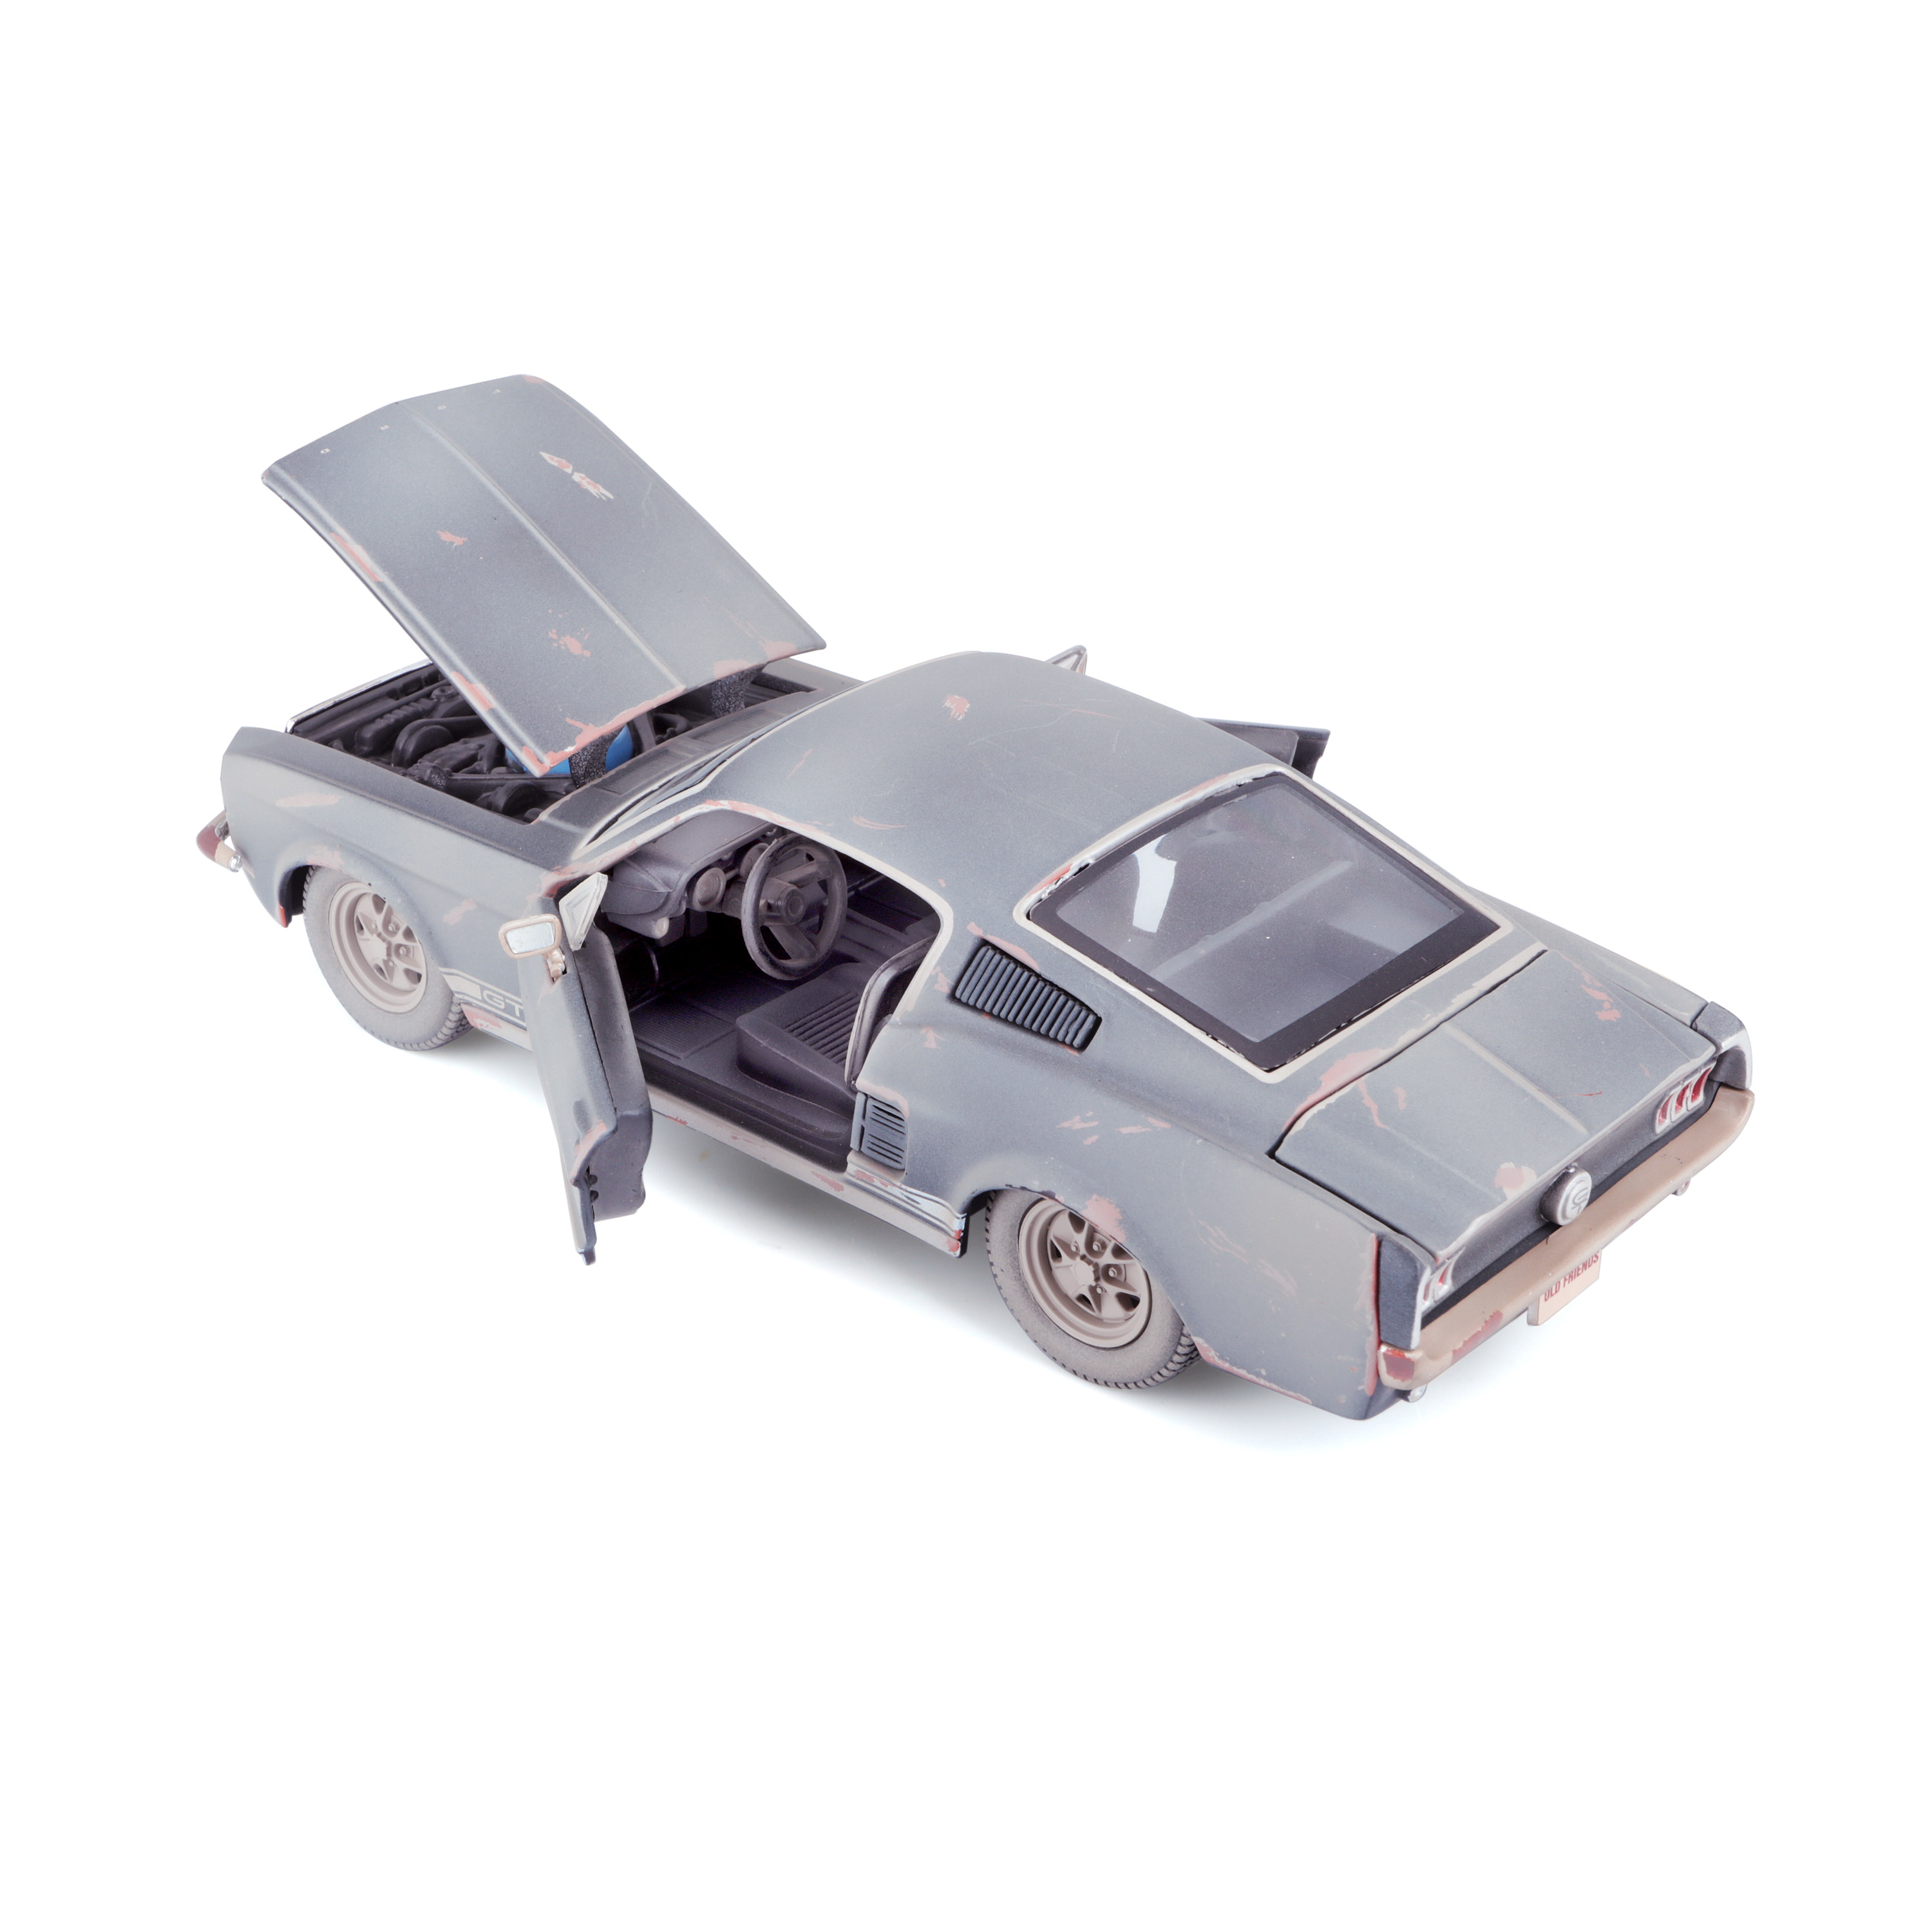 MAISTO Old Friends 1:24) 1967 Spielzeugauto (Maßstab Mustang Ford GT